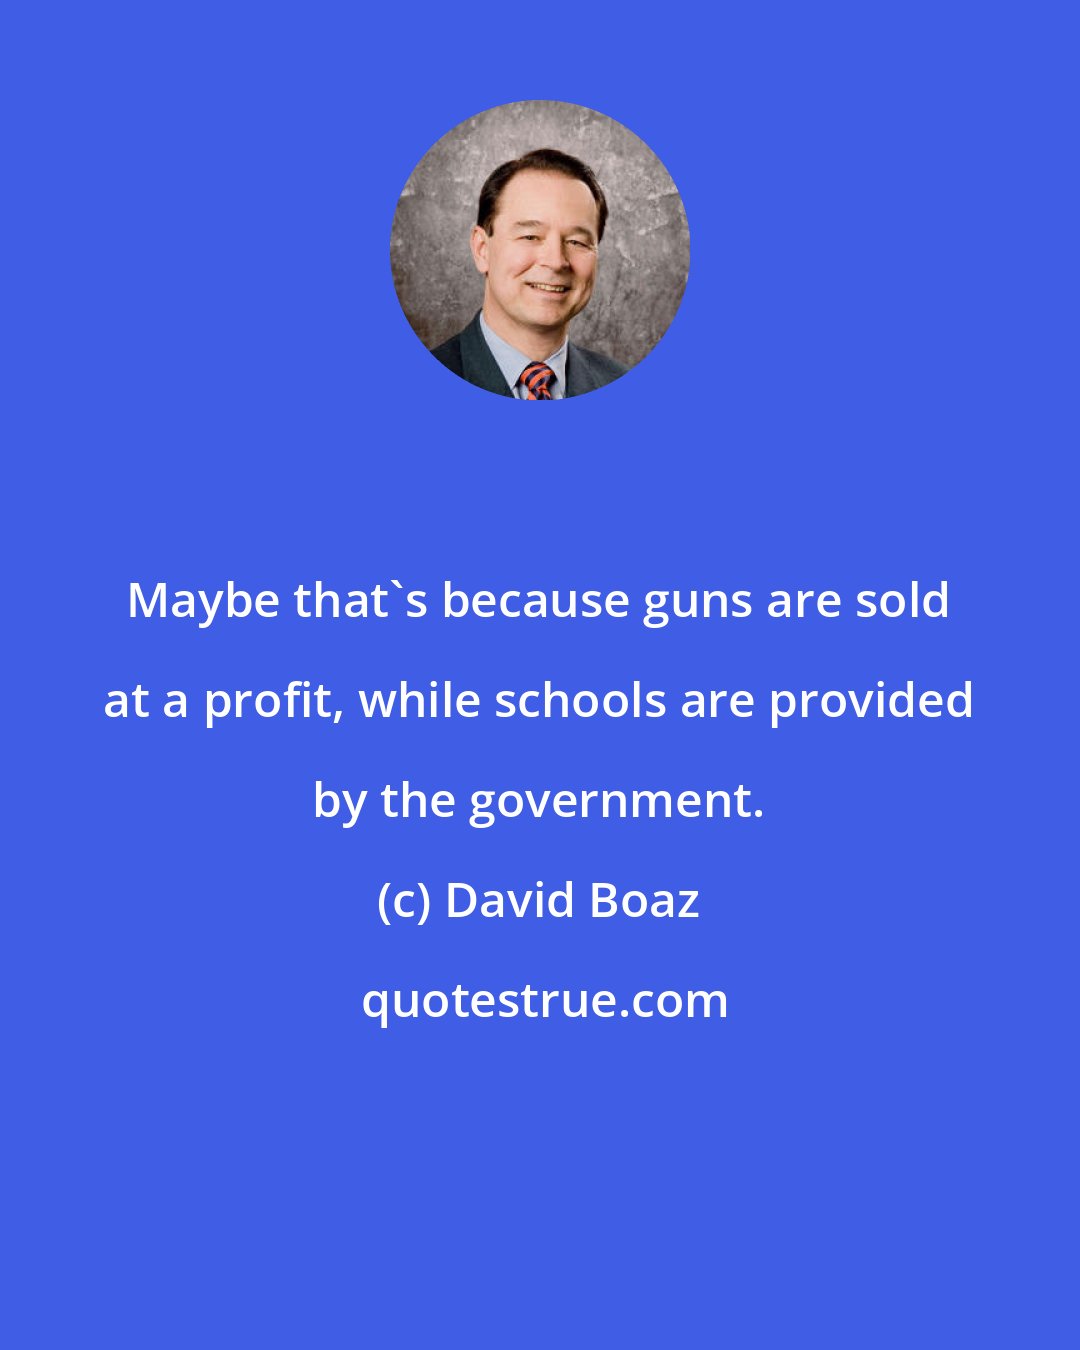 David Boaz: Maybe that's because guns are sold at a profit, while schools are provided by the government.